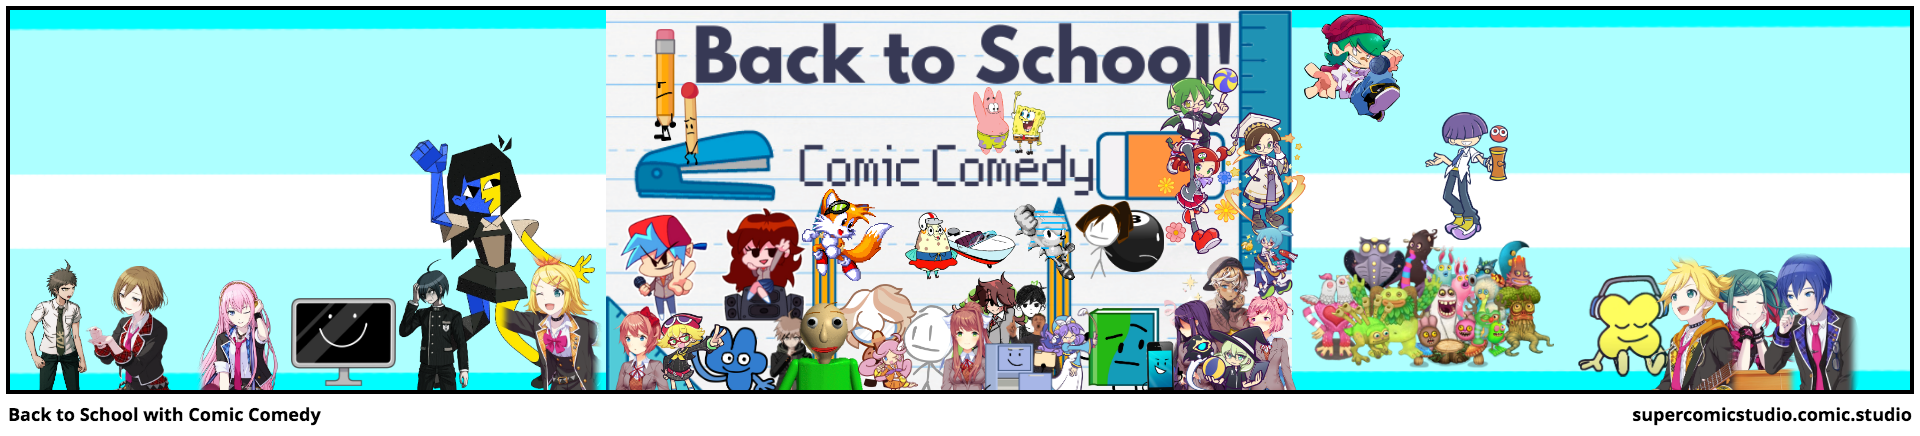 Back to School with Comic Comedy